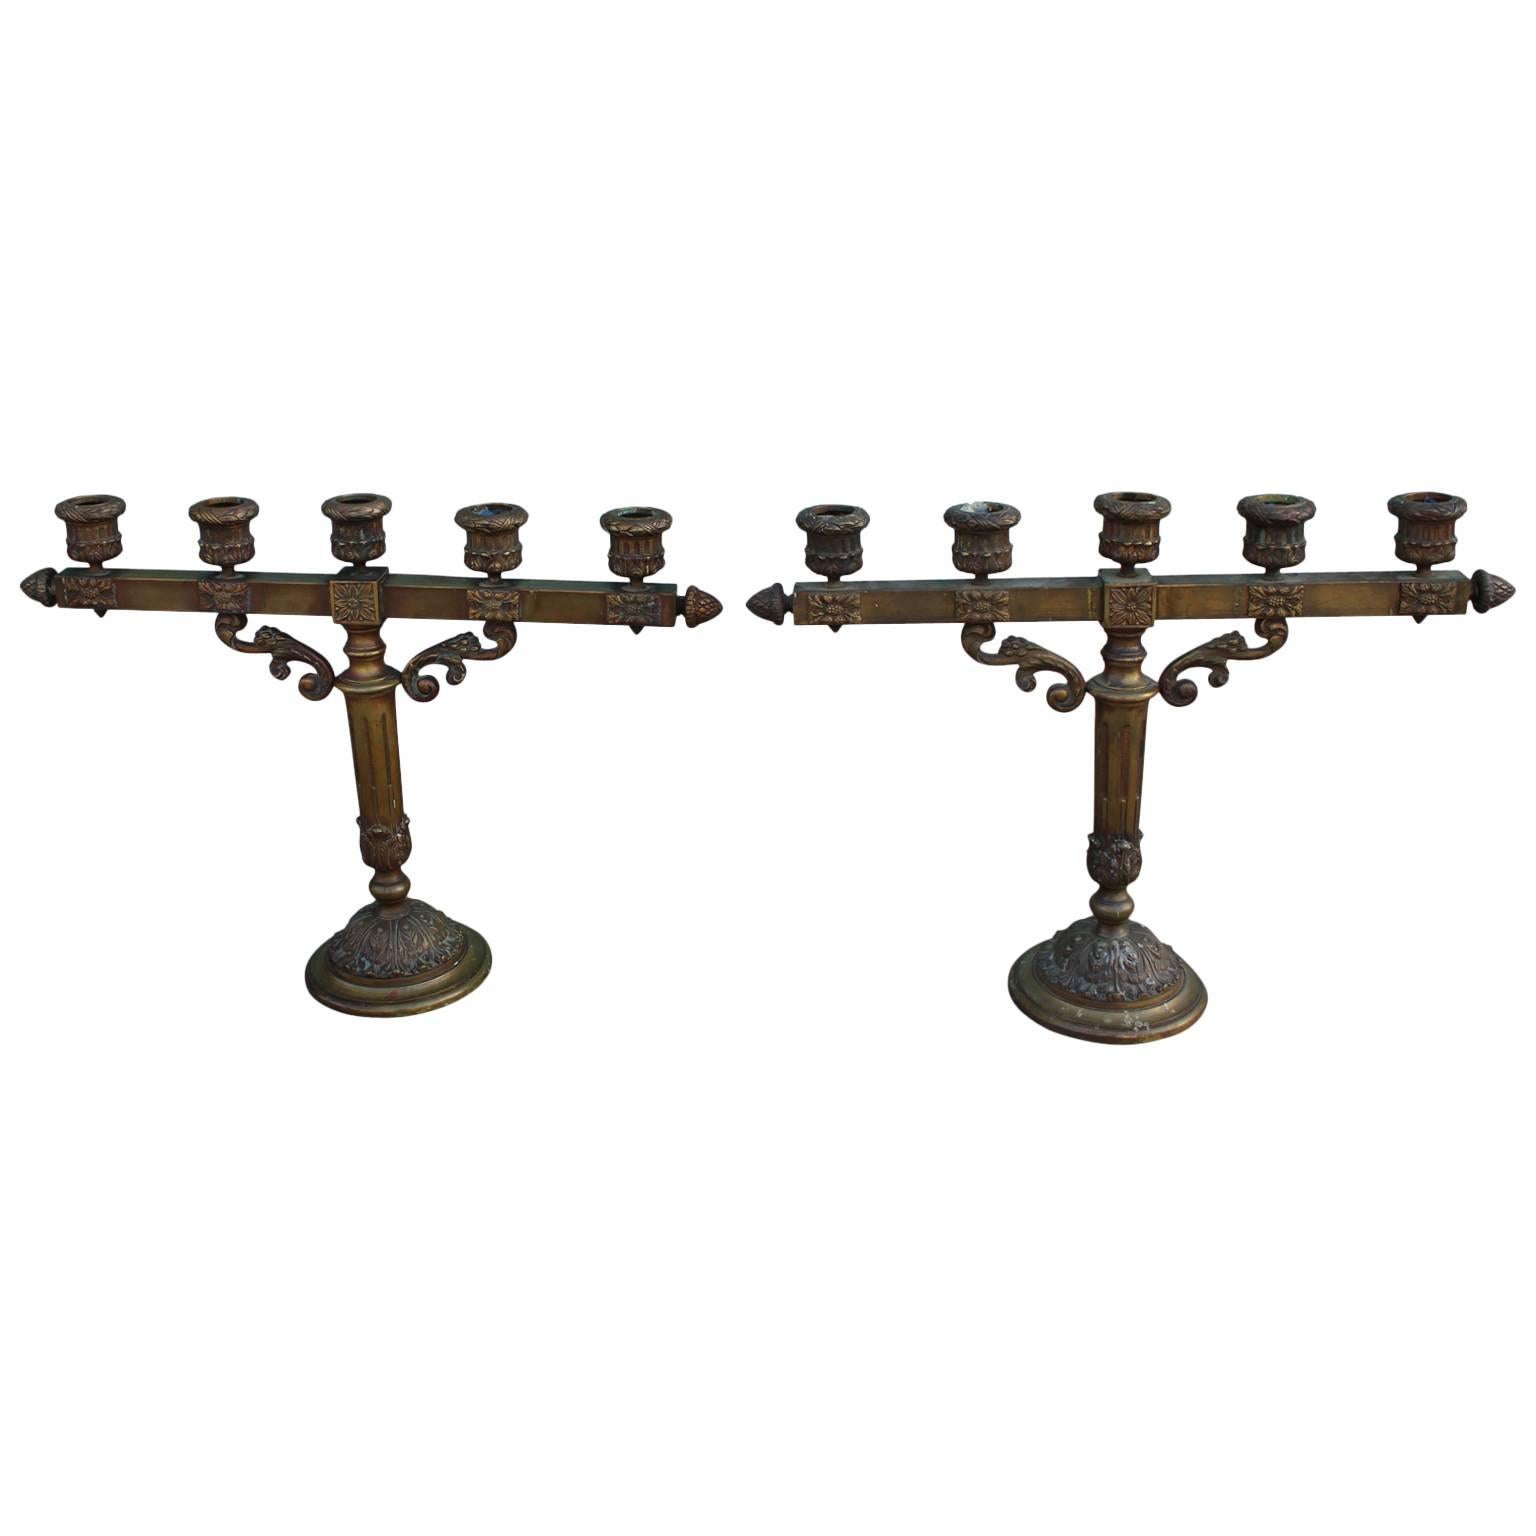 Pair of Classic Antique Bronze French Candelabras